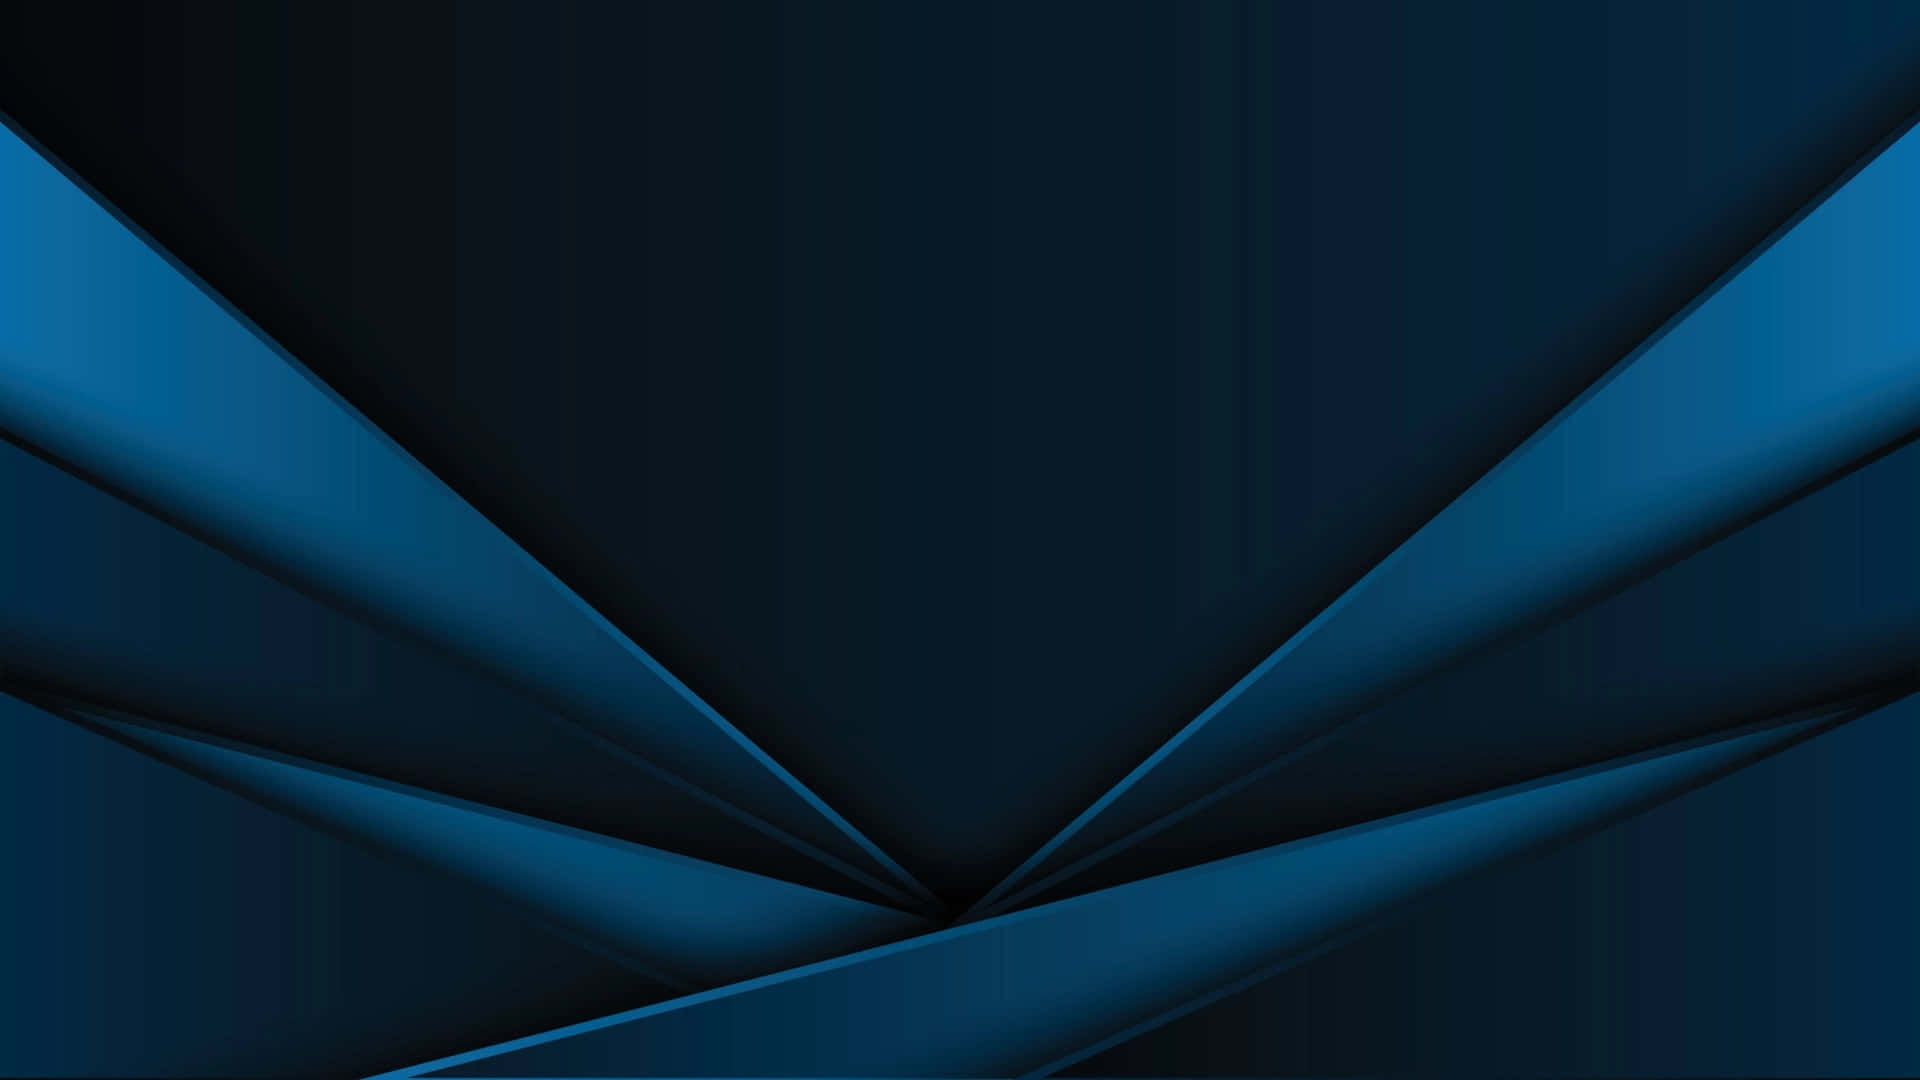 Download Navy Blue Background With Elegant Material Design | Wallpapers.com